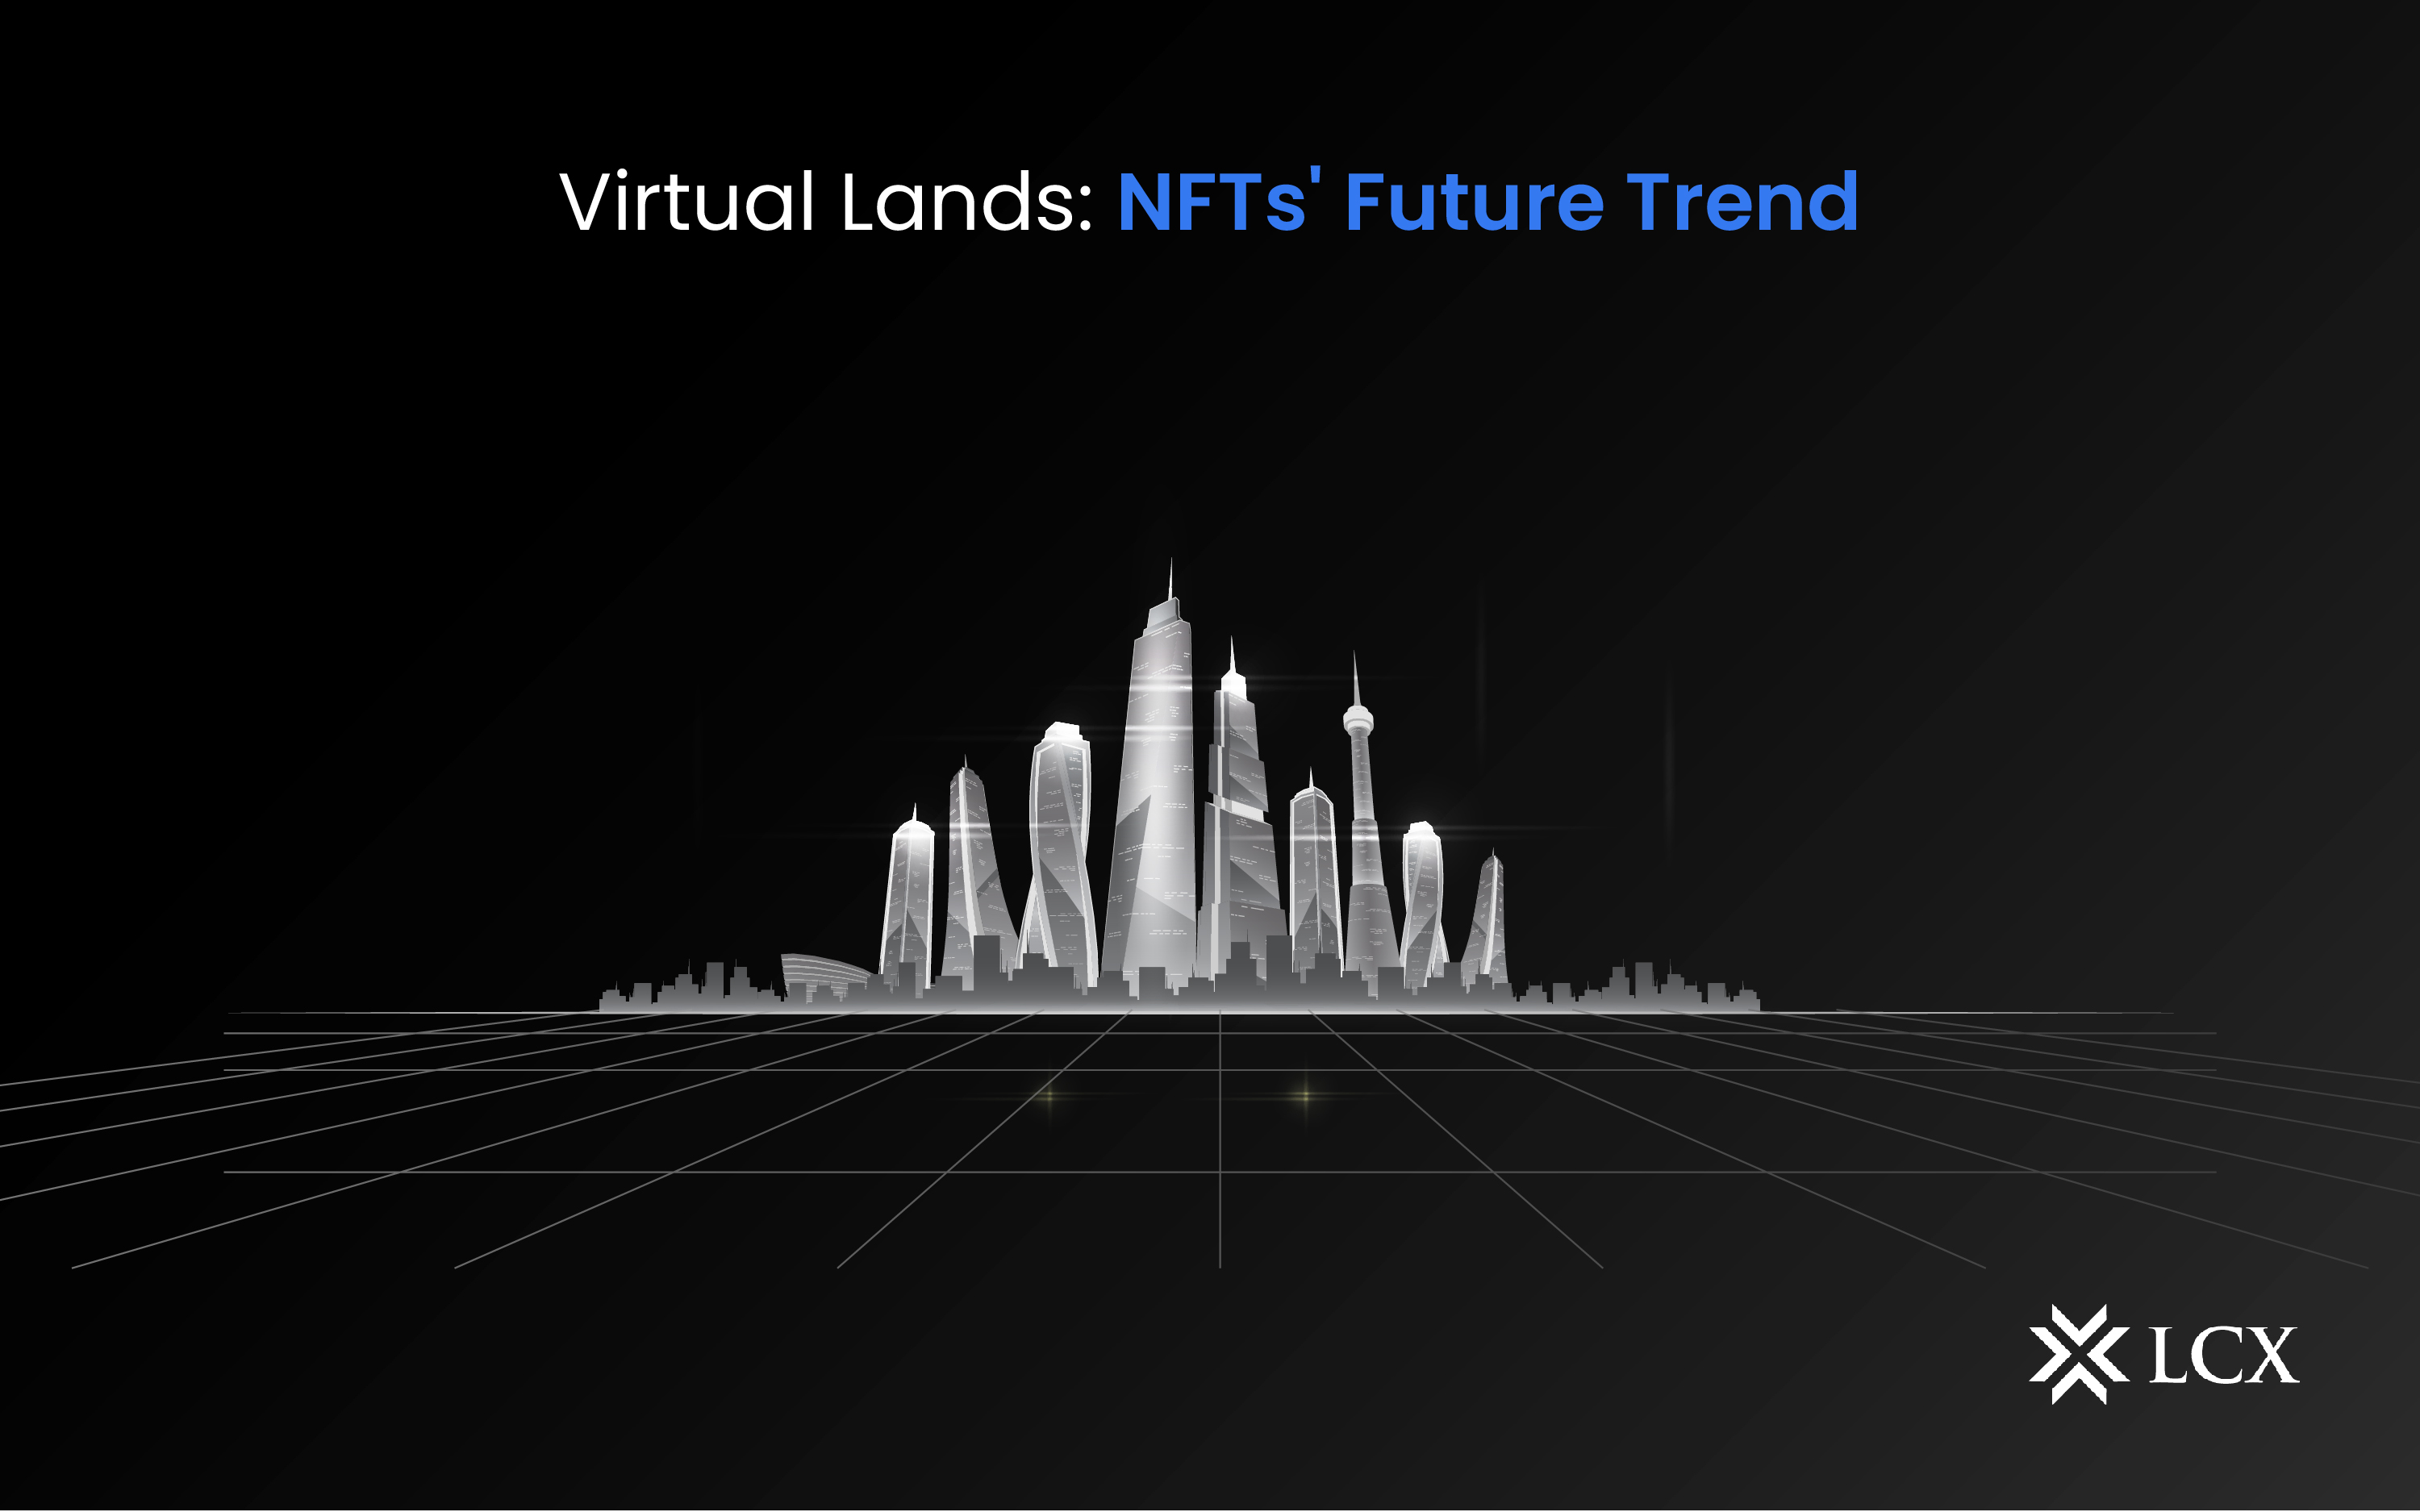 Virtual Lands: The Future Trend of NFTs